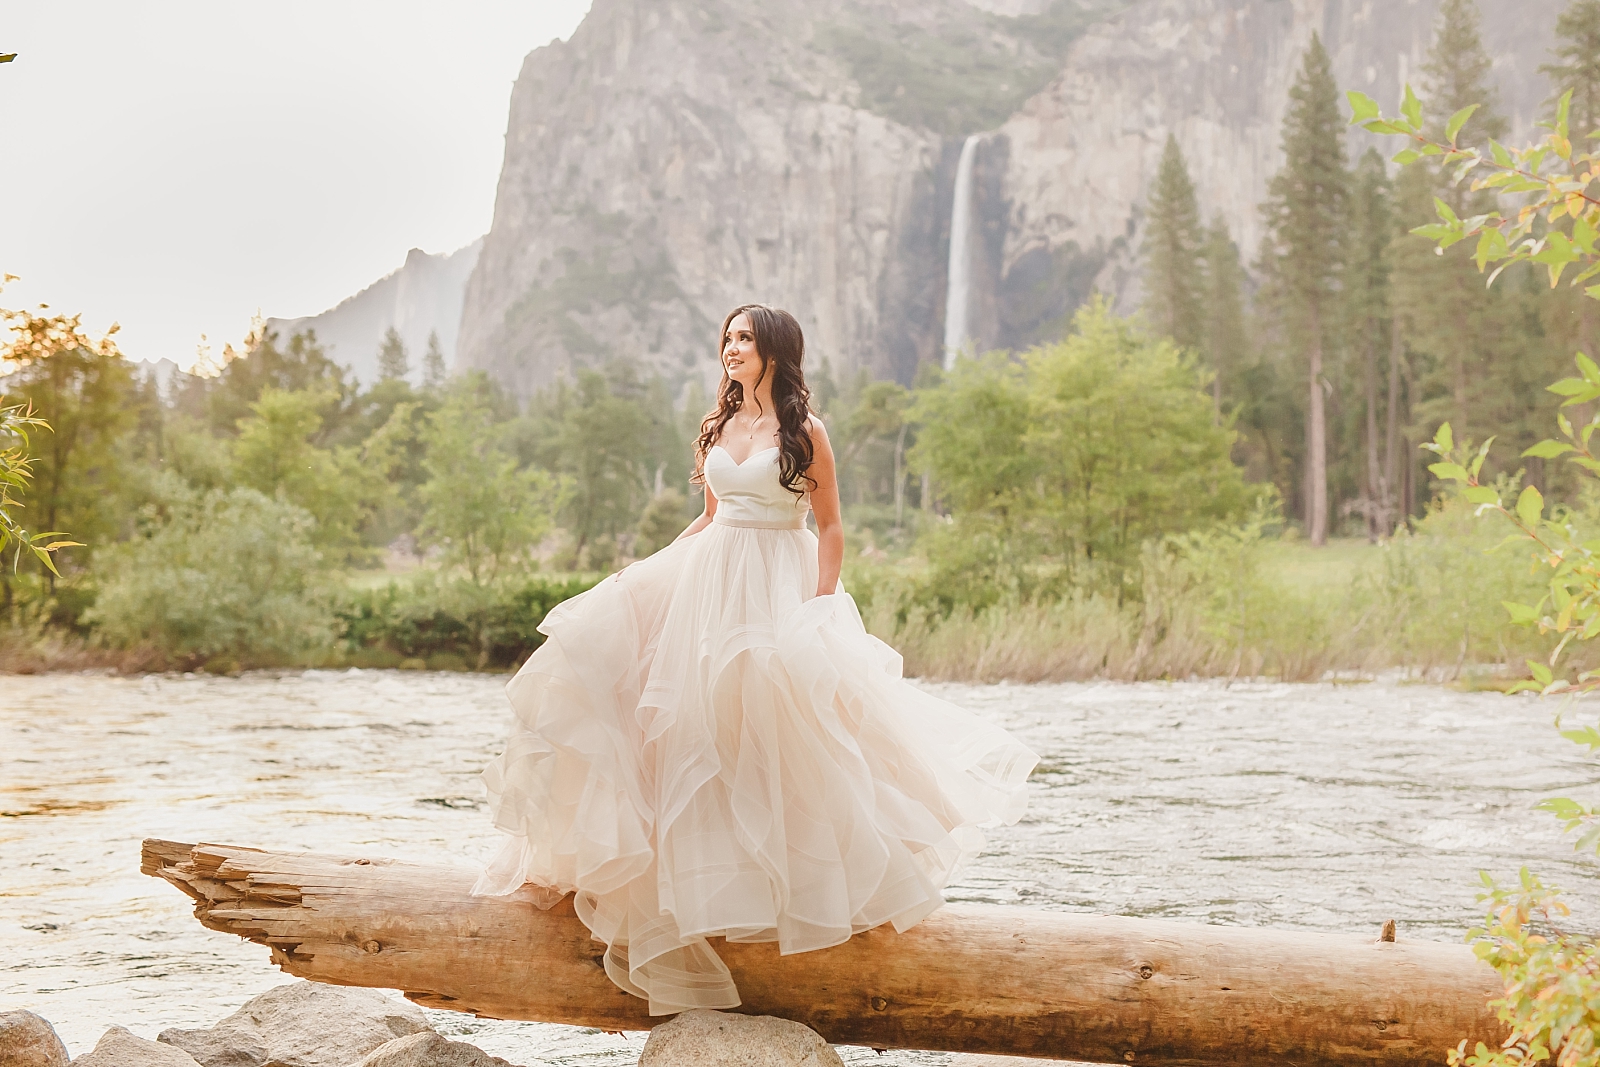 Tulle gown in Yosemite valley